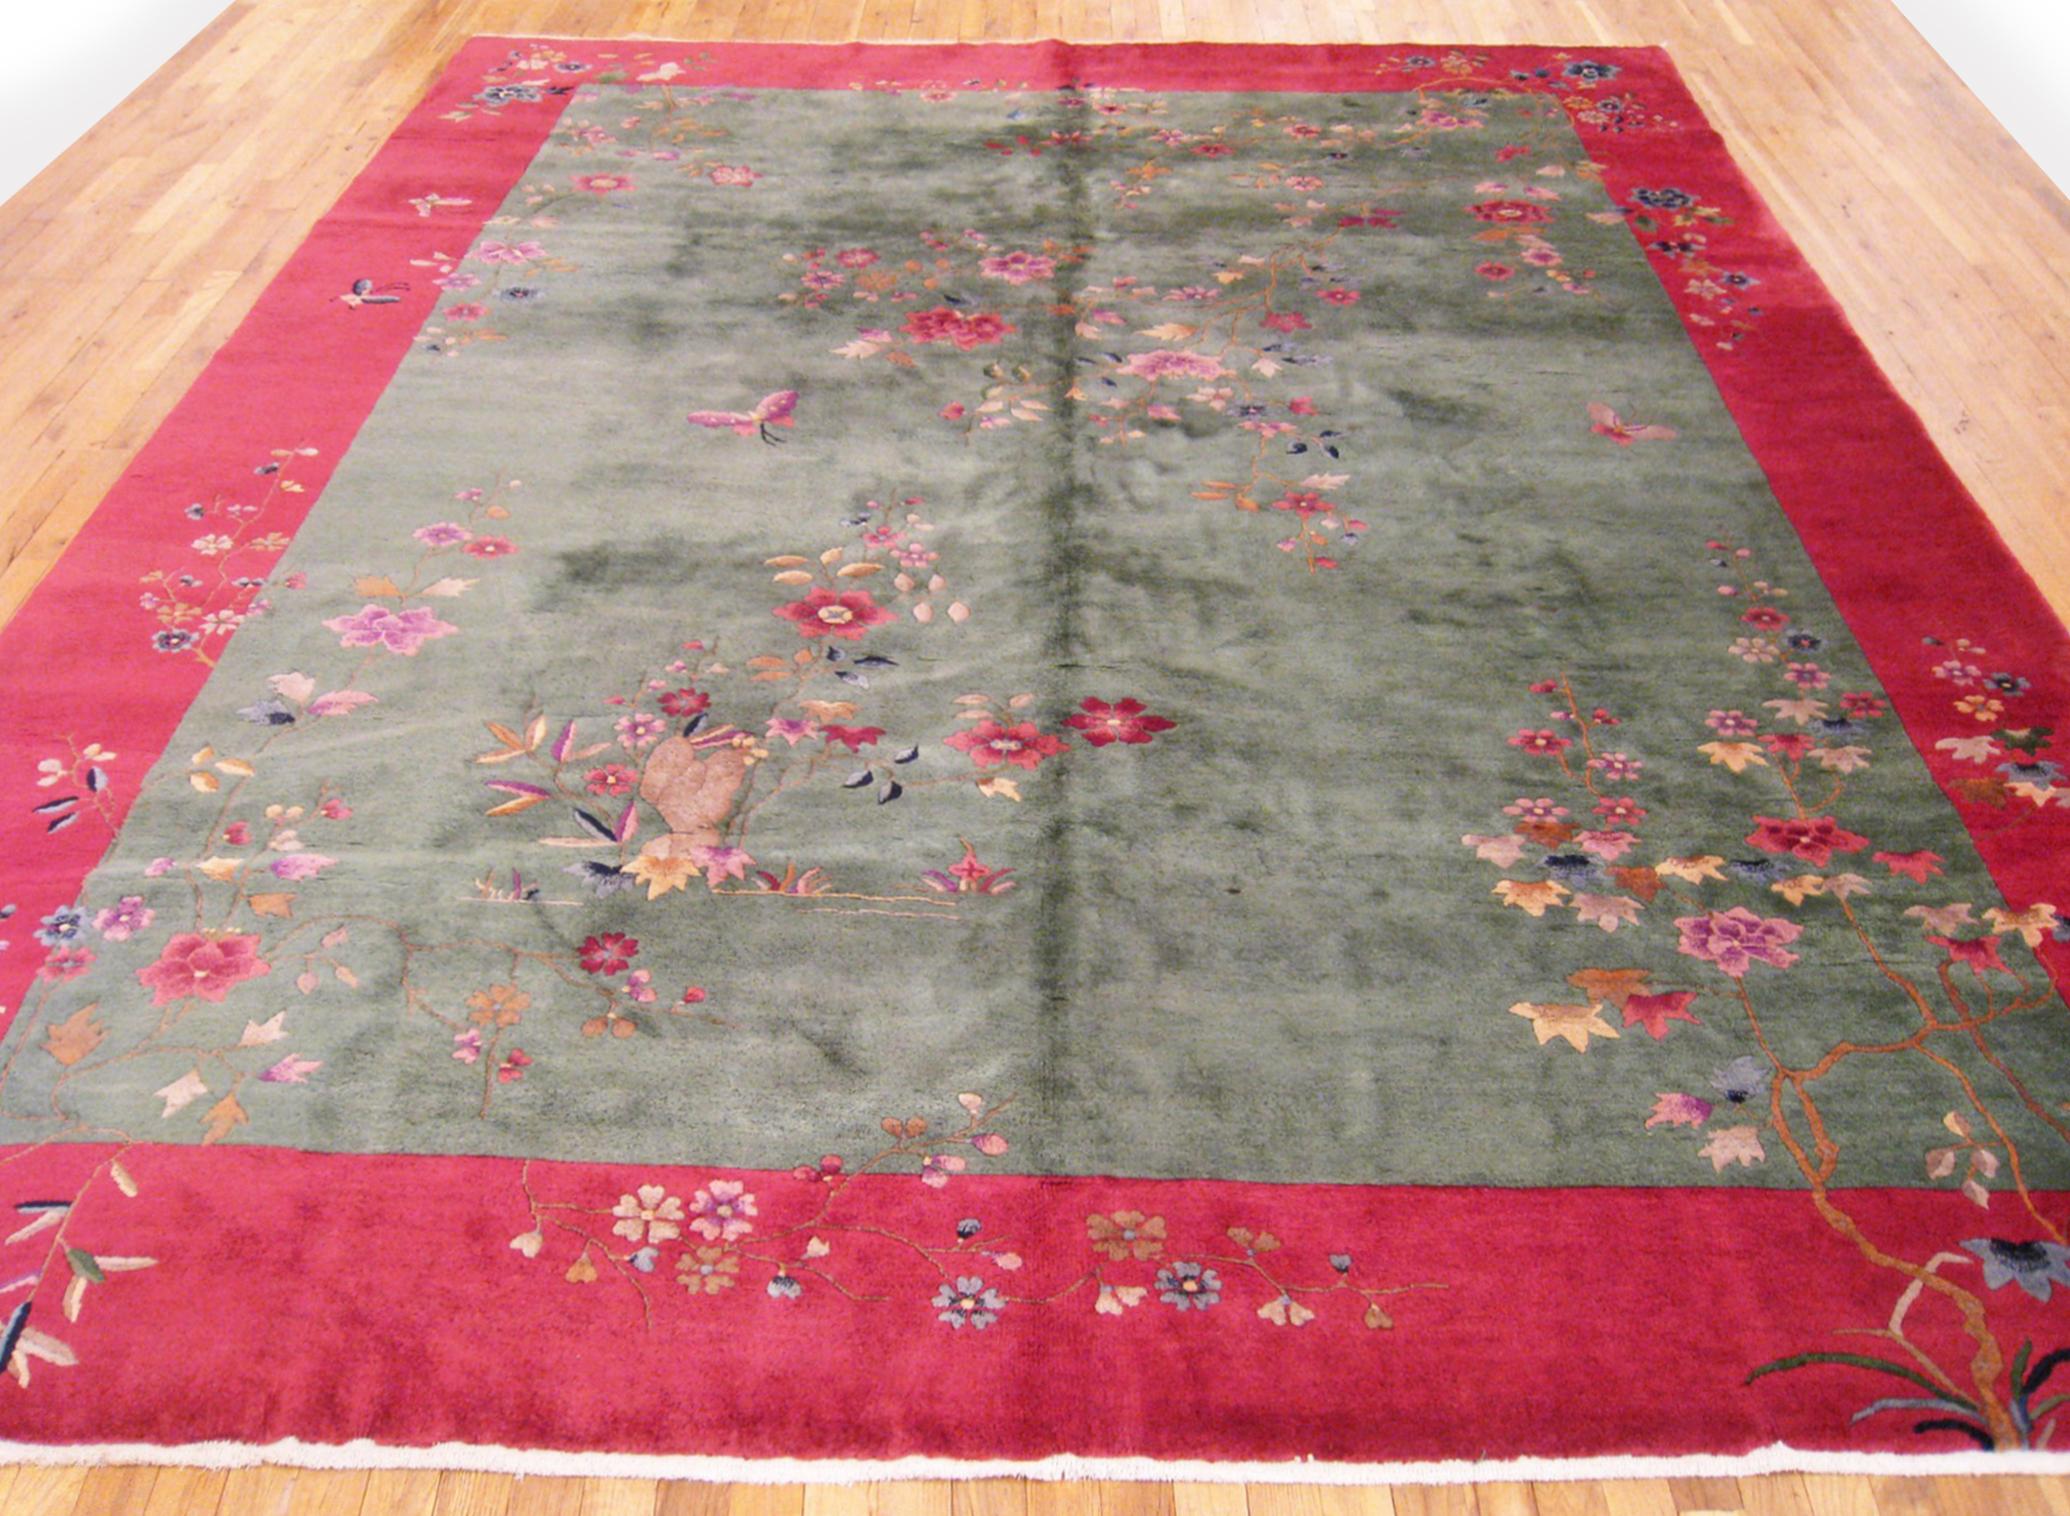 Vintage Chinese Art deco Rug, room size, circa 1920.

A one-of-a-kind antique Chinese Art deco oriental carpet, hand-knotted with medium thickness wool pile. This beautiful hand-knotted rug features floral elements in a large green open field,